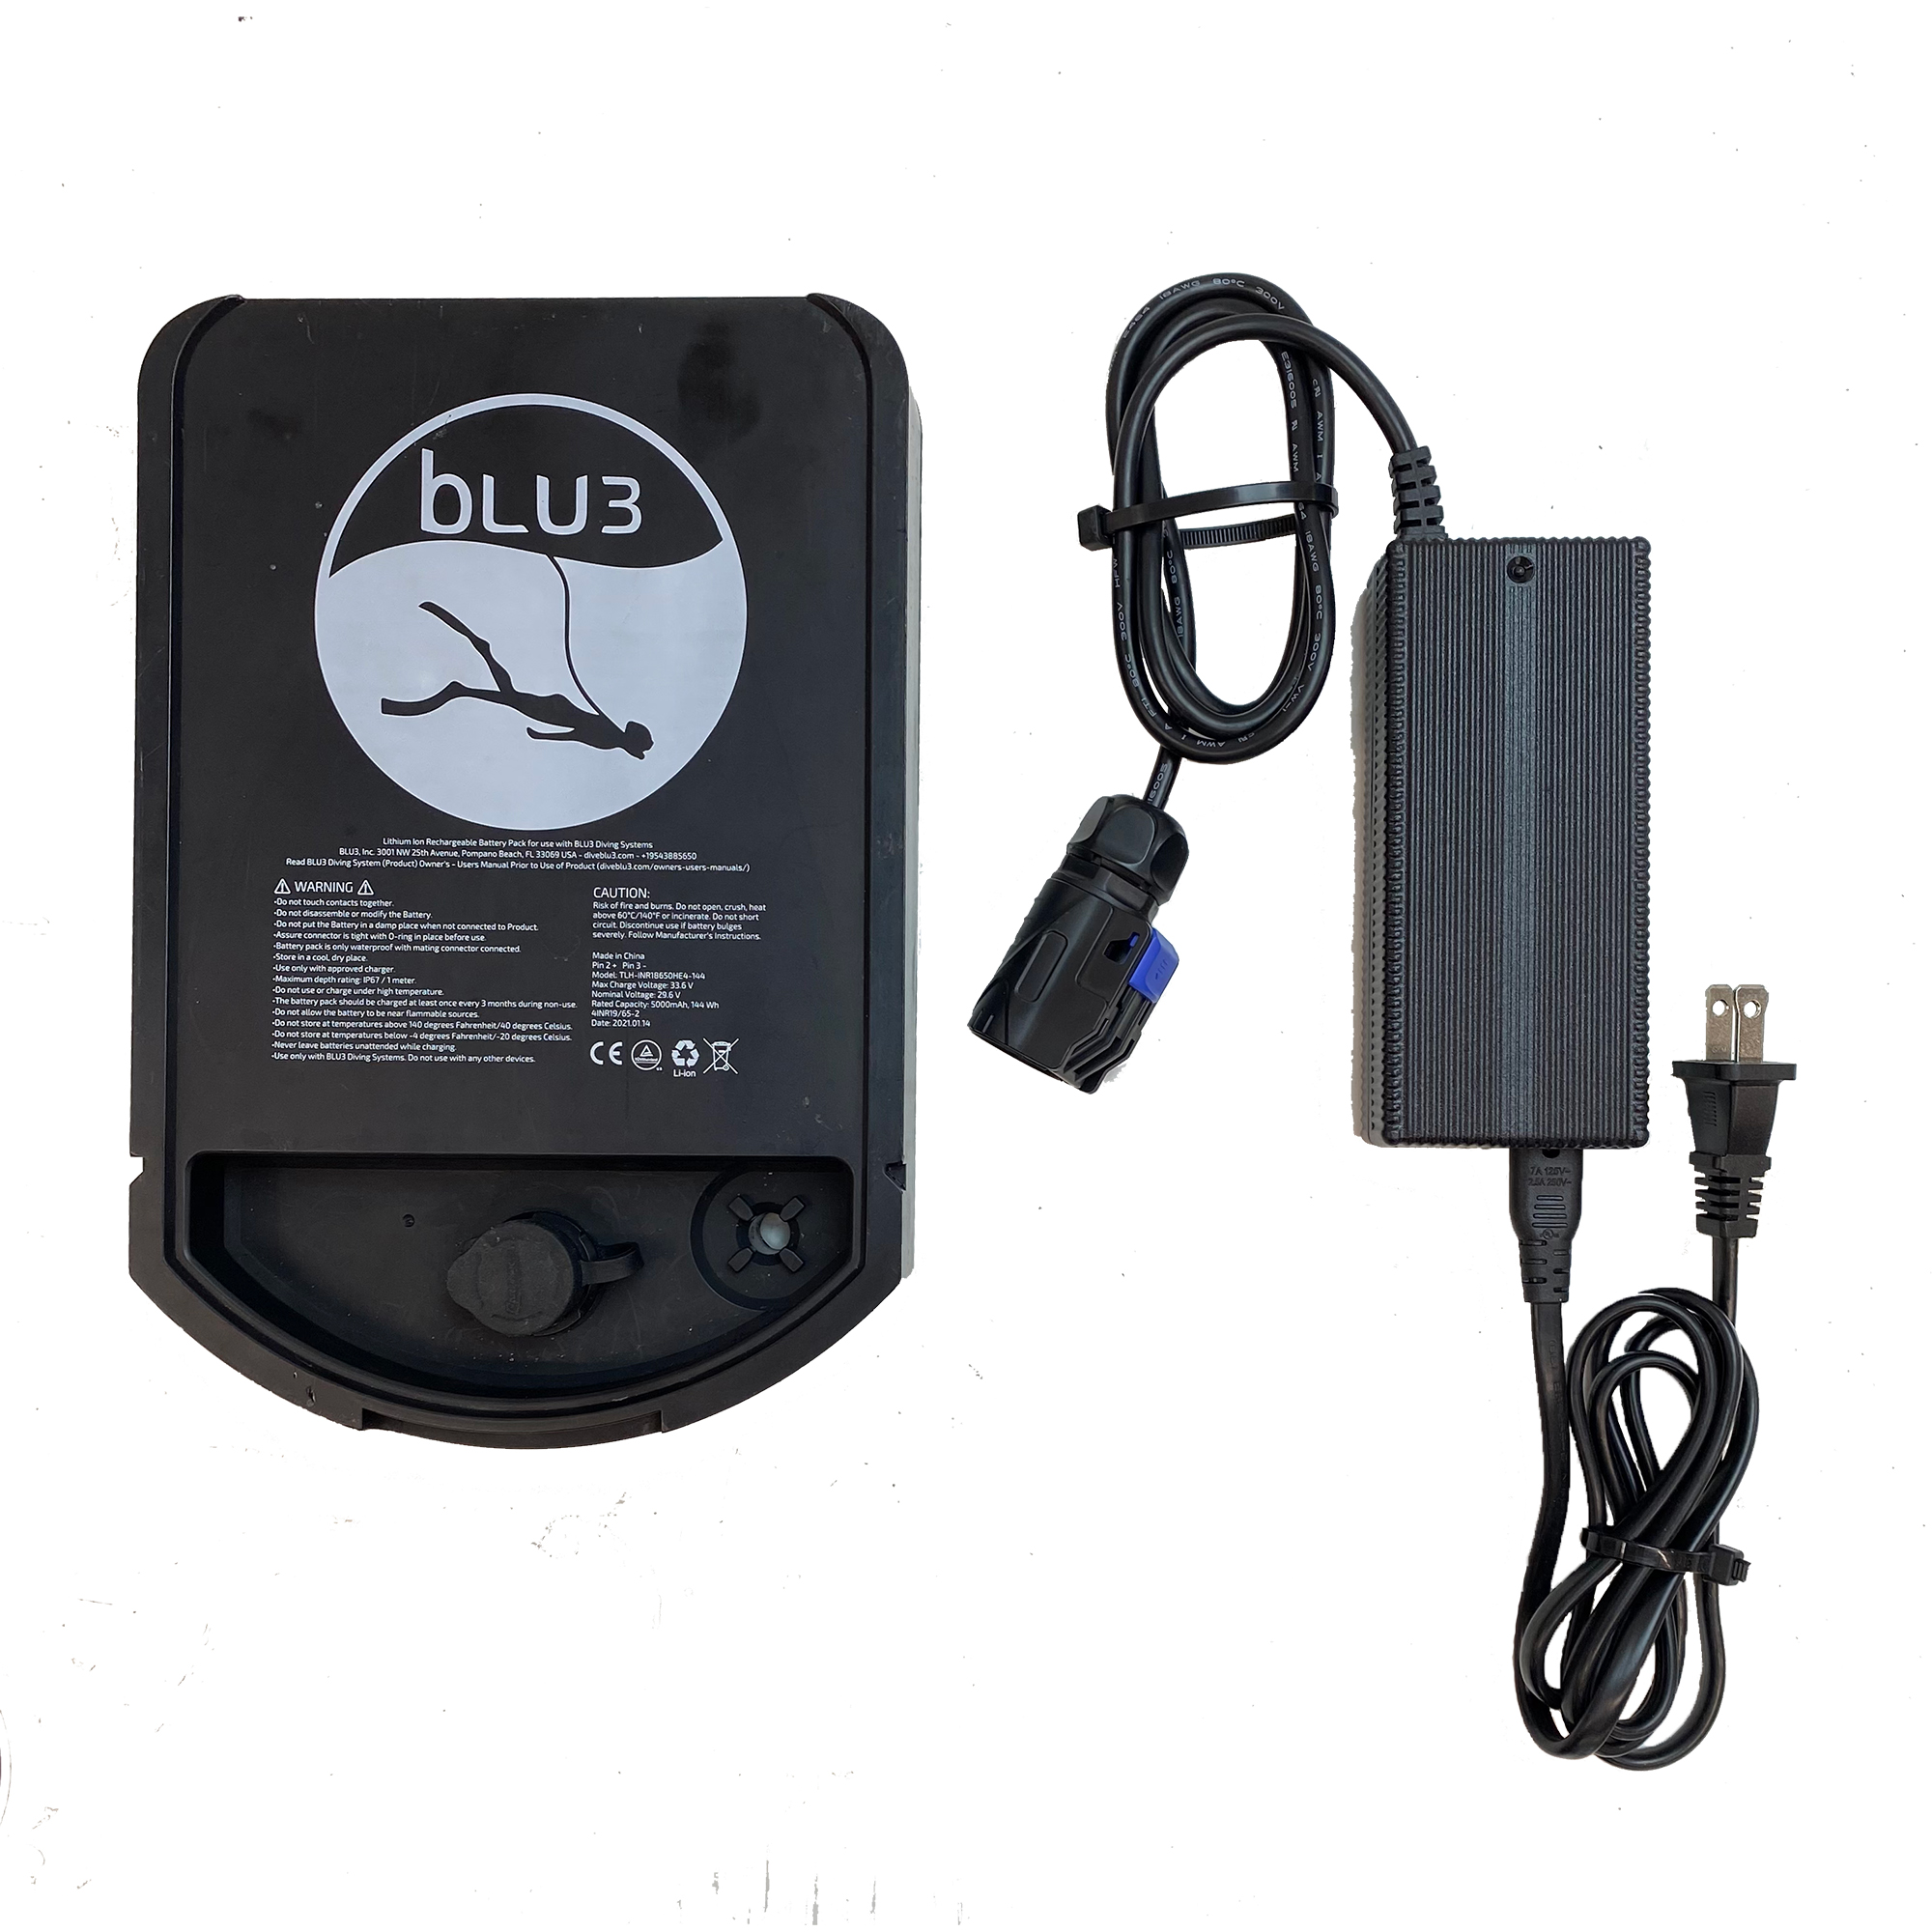 BLU3 Nomad Portable Tankless Diving System Battery and Charger